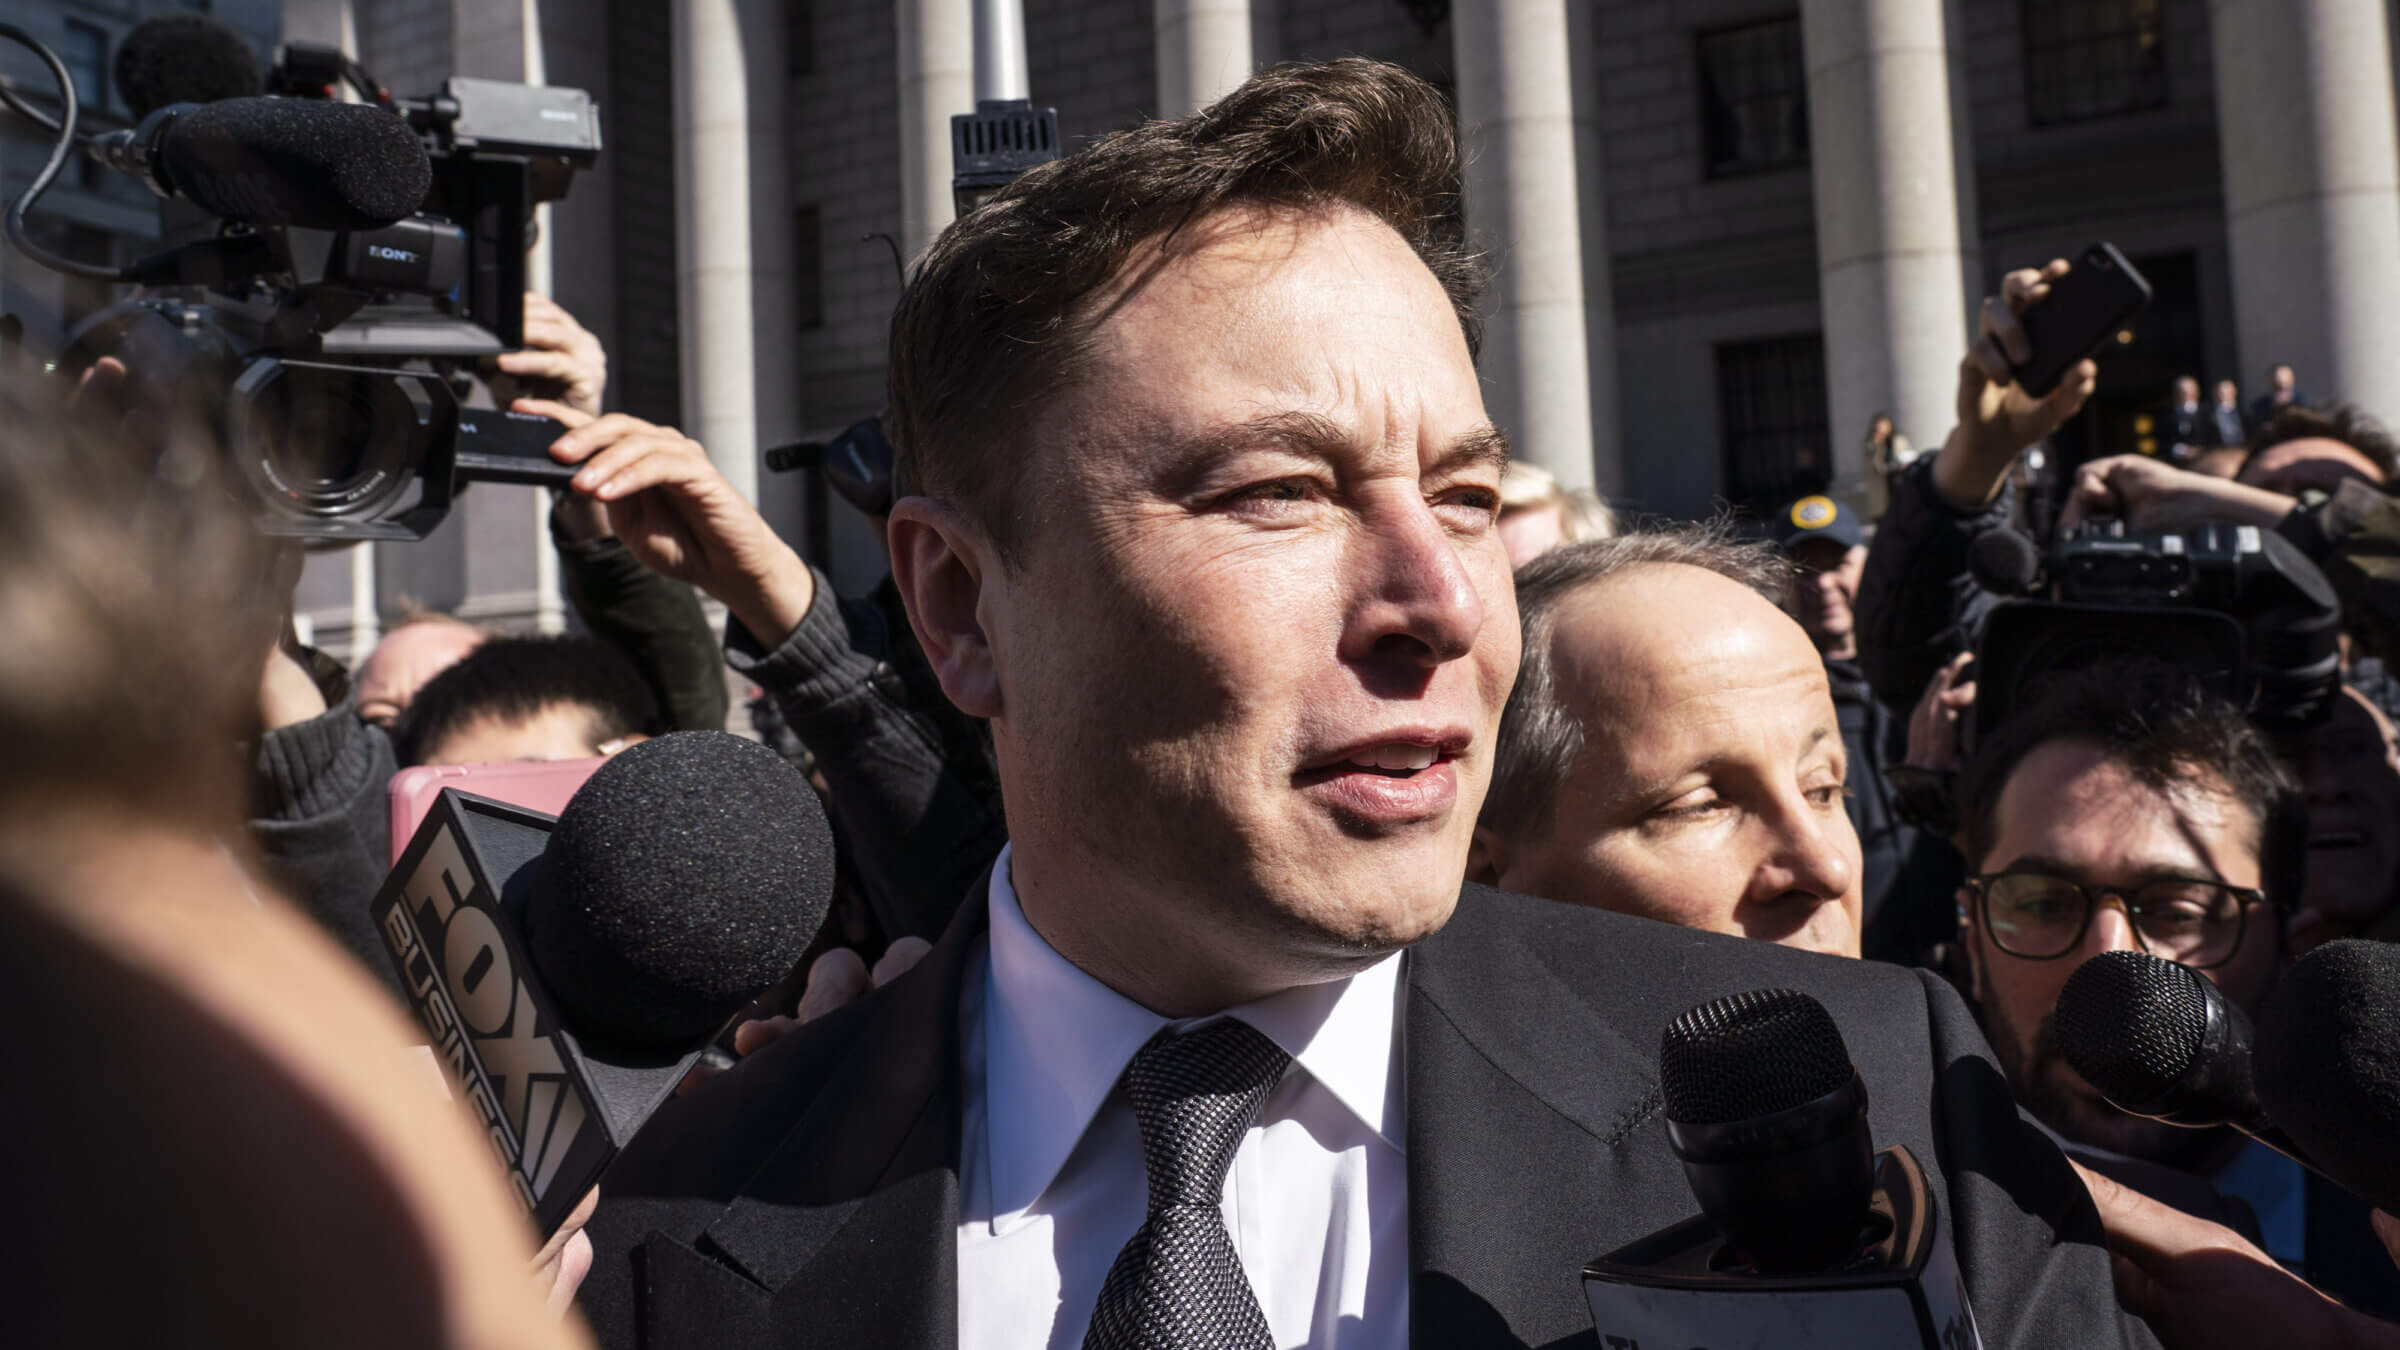 Elon Musk departs from federal court in New York on Thursday, April 4, 2019